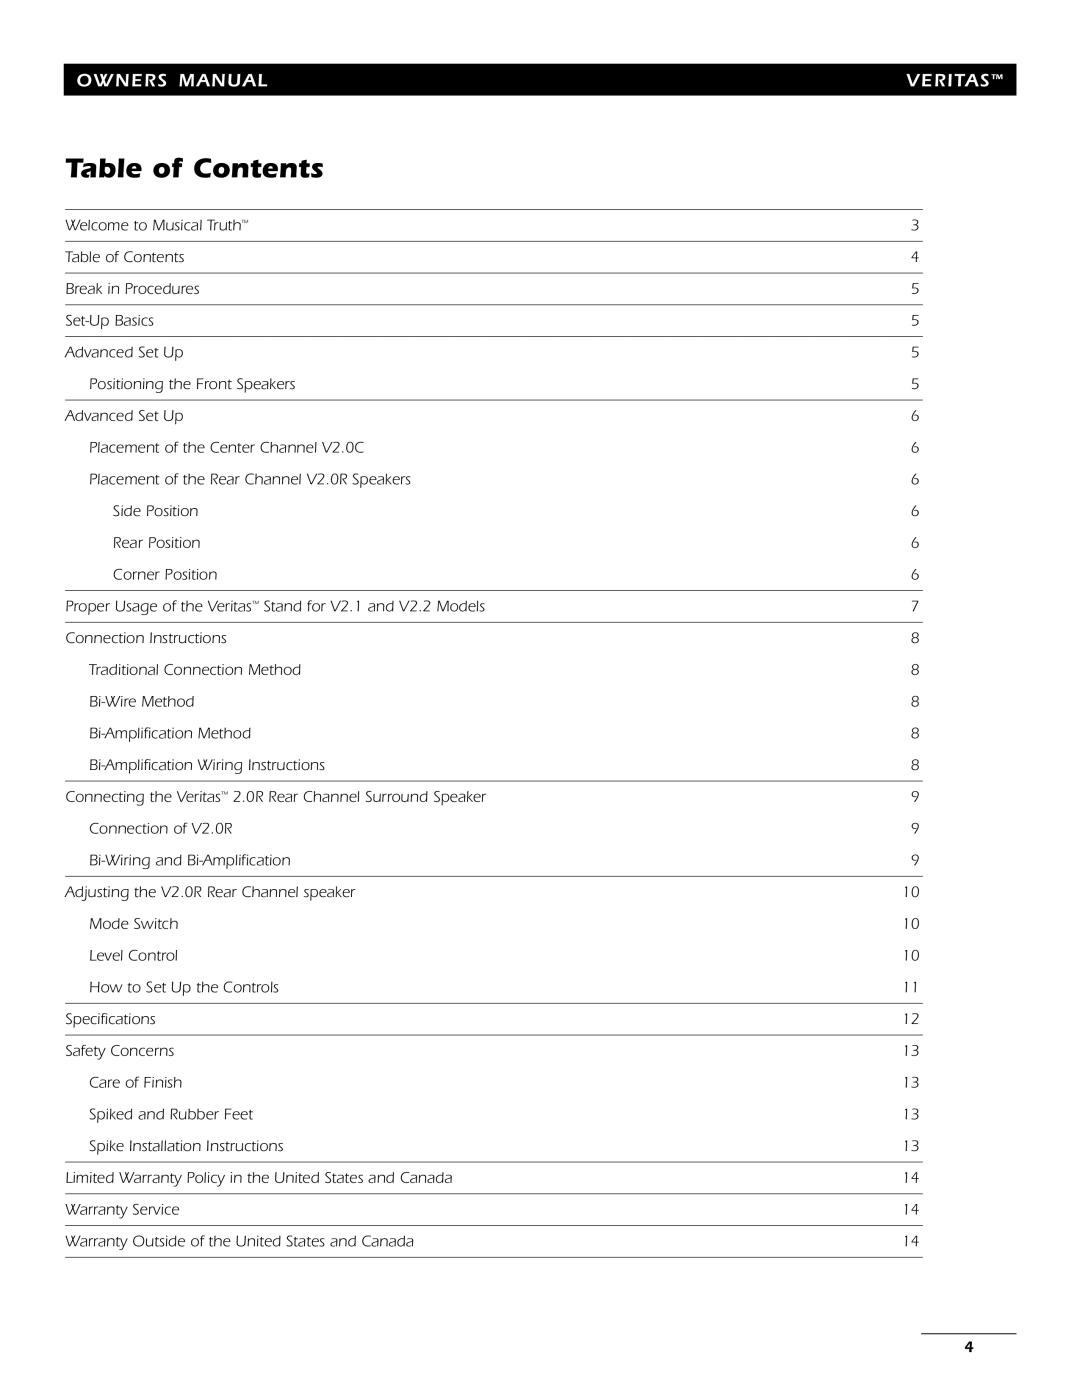 Energy Speaker Systems 7AI manual Table of Contents, Veritas 